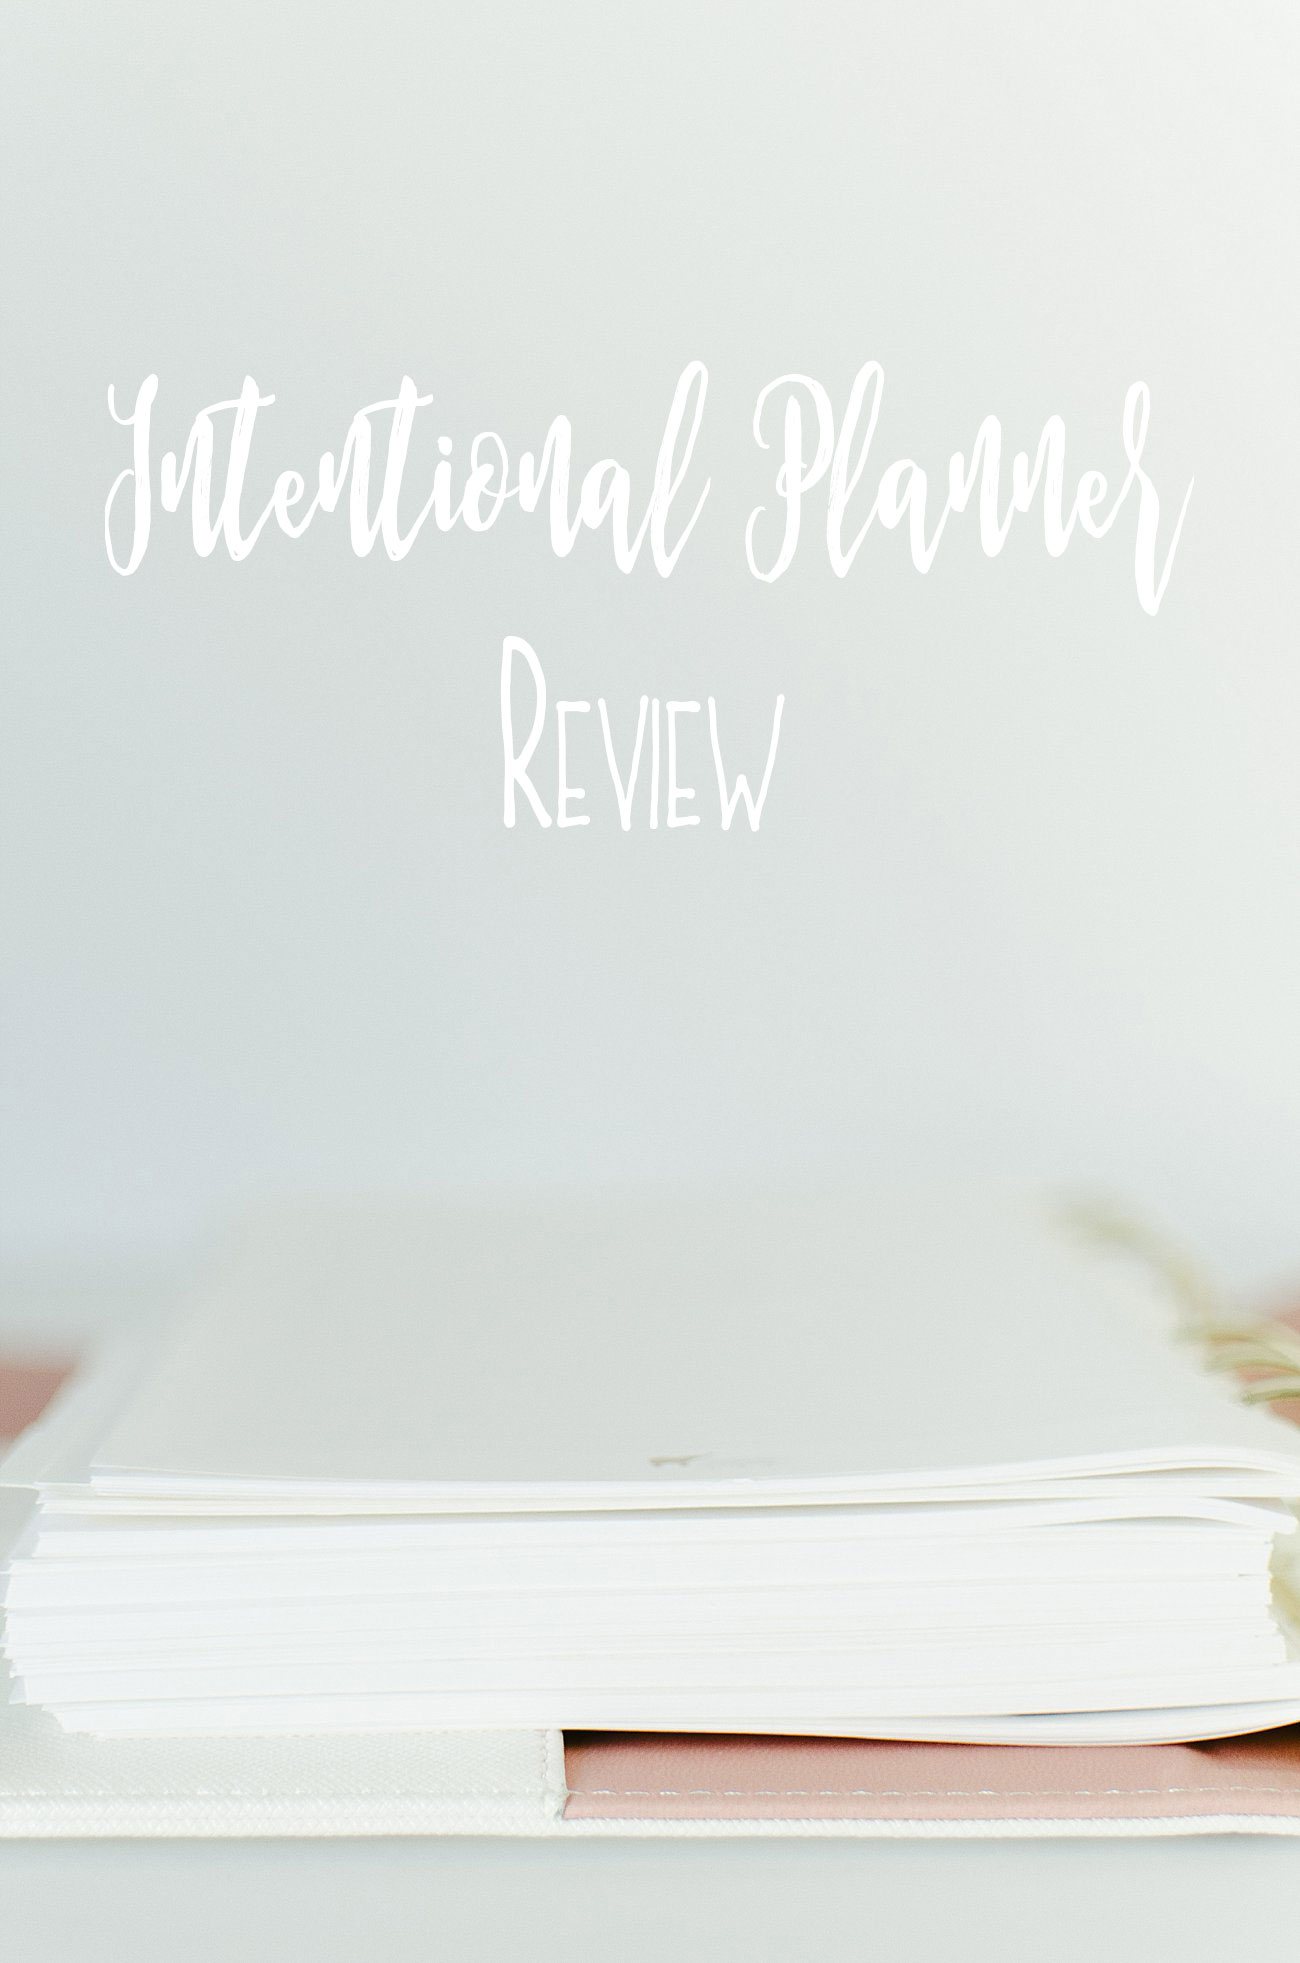 Taking on 2017 with The Intentional Planner | Intentional Planner Review - Christian Planner and Prayer Journal Review (15)